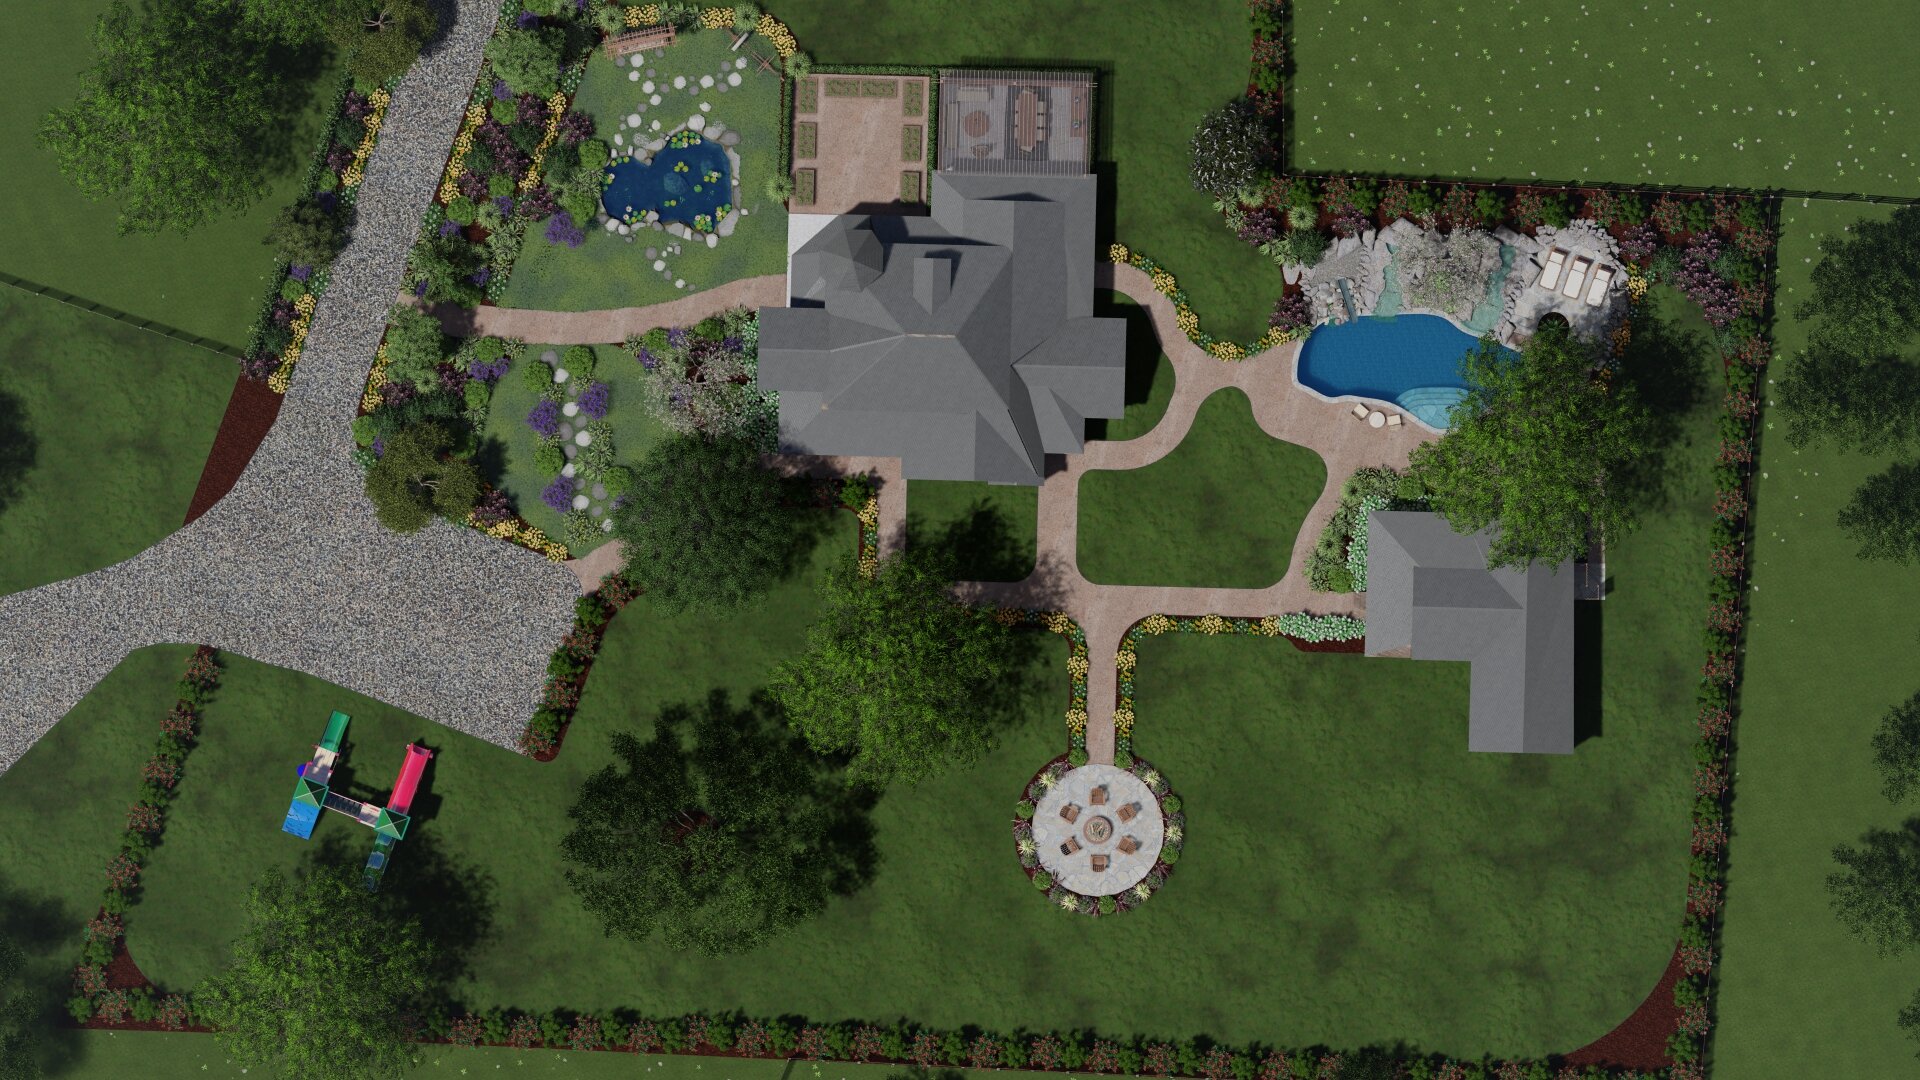 Overview of house with gravel pathways, pond, fire pit and in ground swimming pool